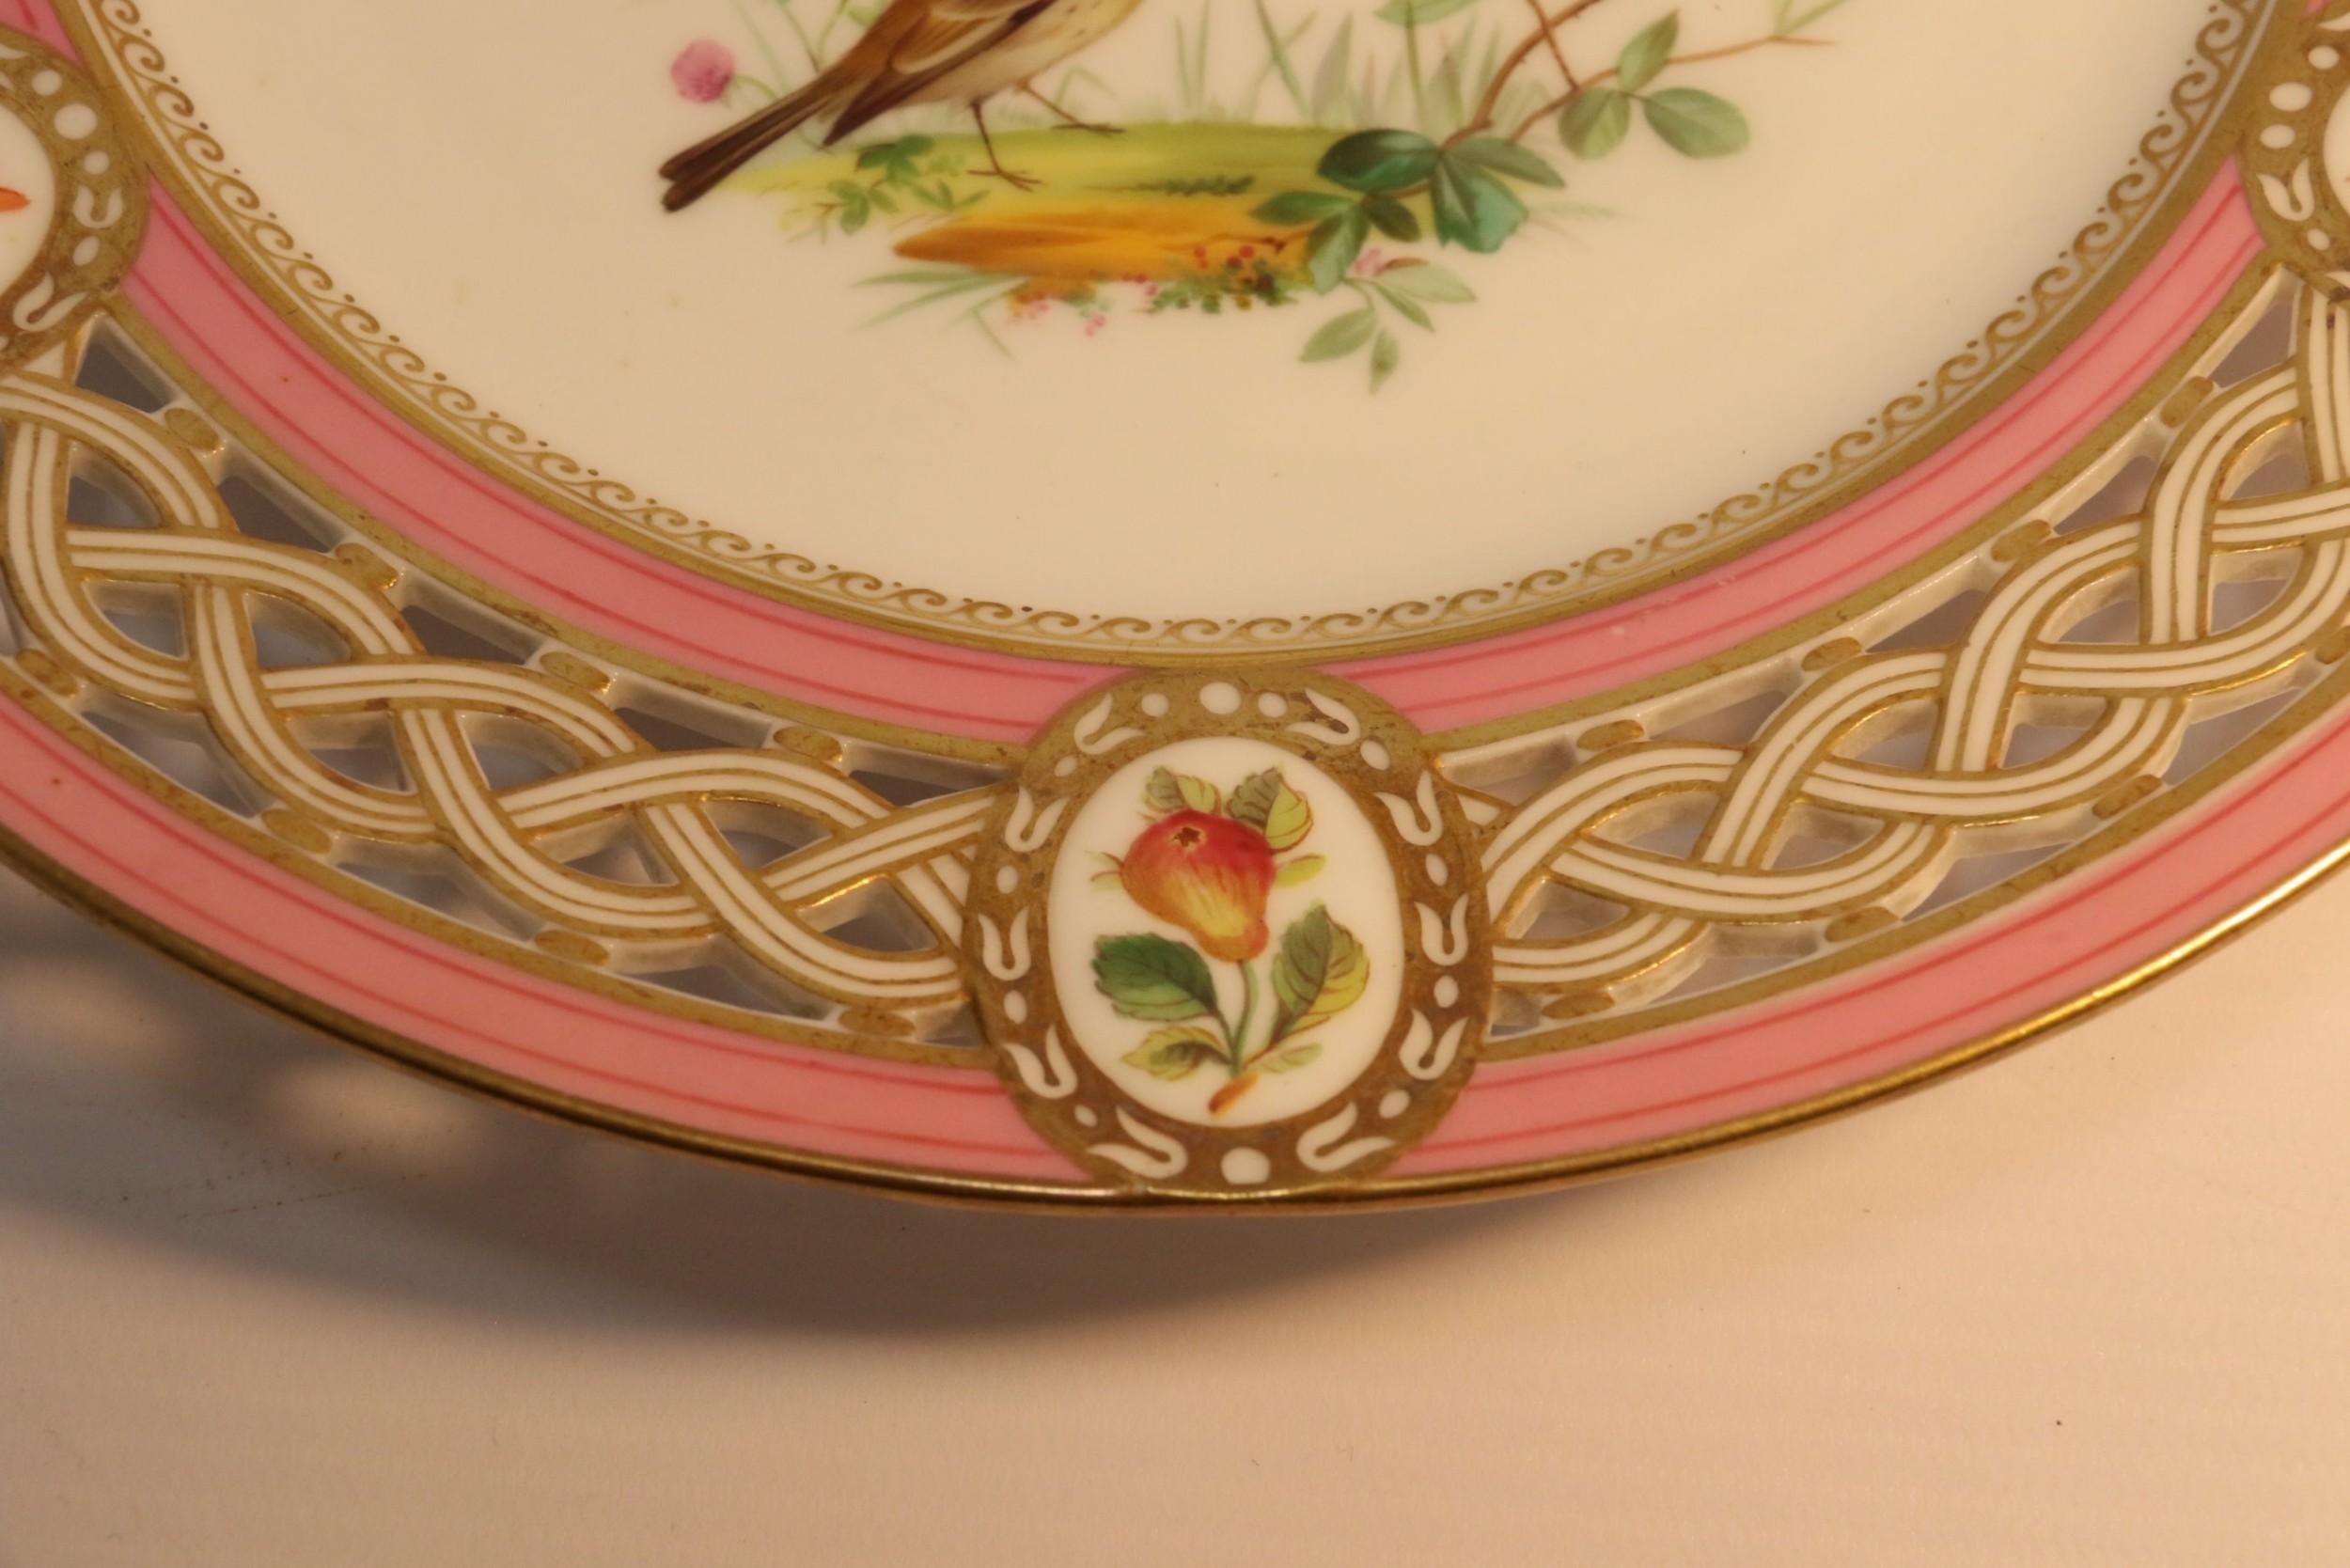 This beautiful English porcelain cabinet plate was made at the Minton factory circa 1863.
This fine quality piece has a hand painted centre decorated with birds on a leafy branch and a pierced and gilded border with six oval panels with various